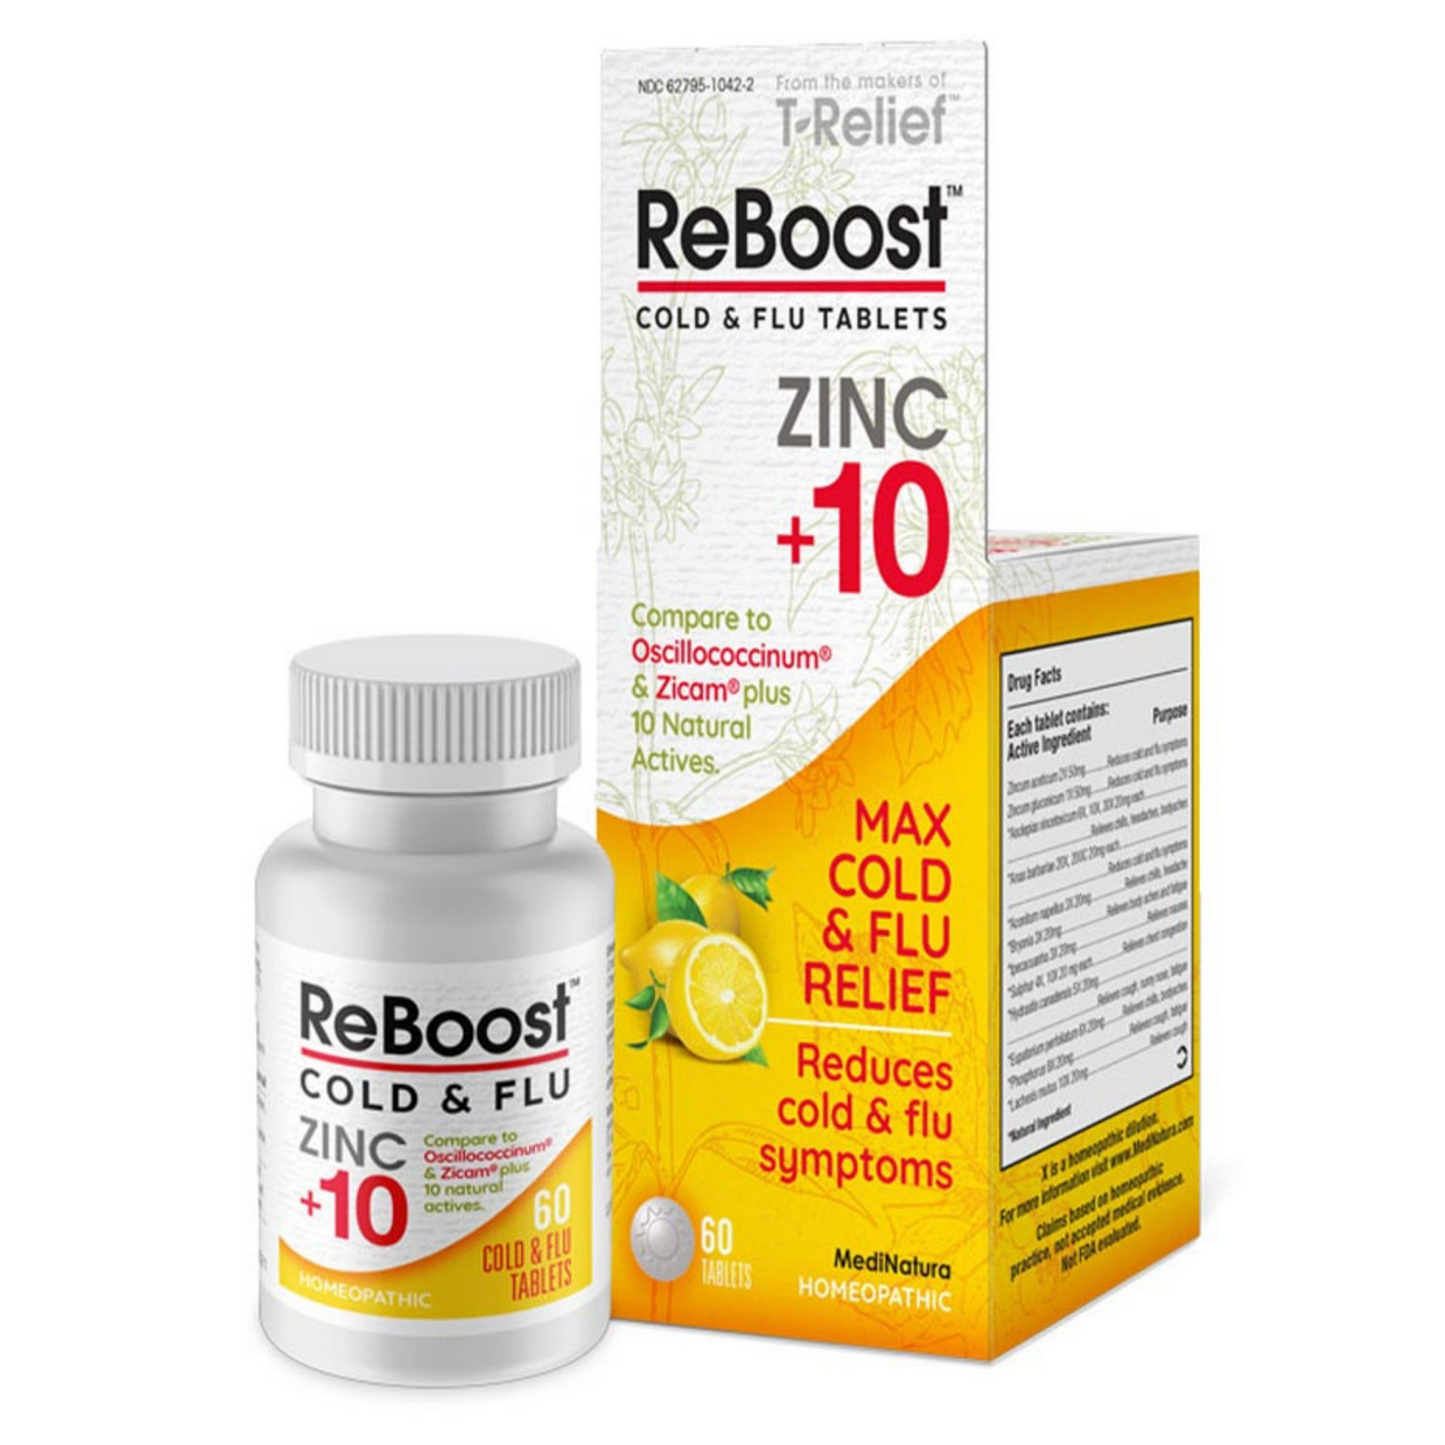 Primary image of Reboost Cold & Flu Tablets